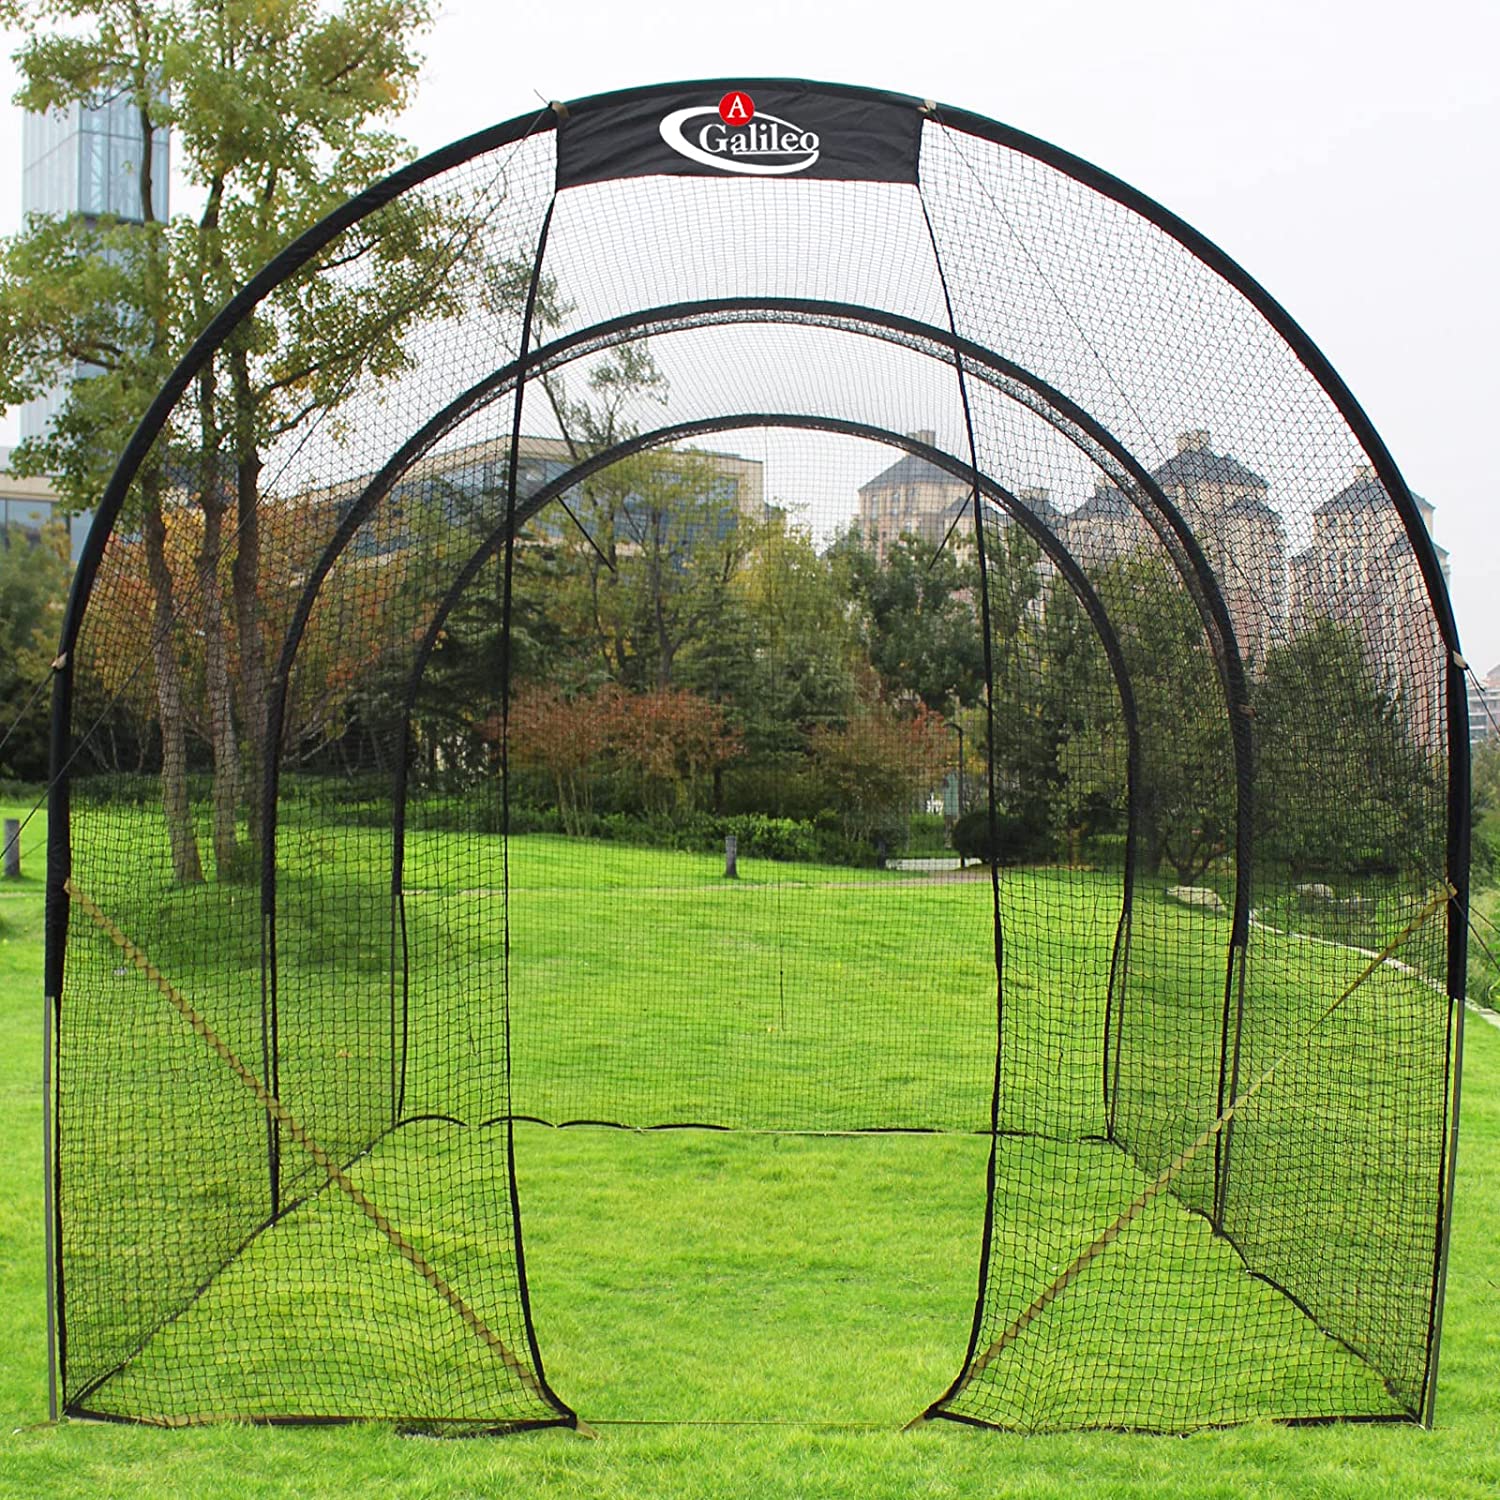 Gagalileo 16x10x10FT Baseball Batting Cage Net Replacement